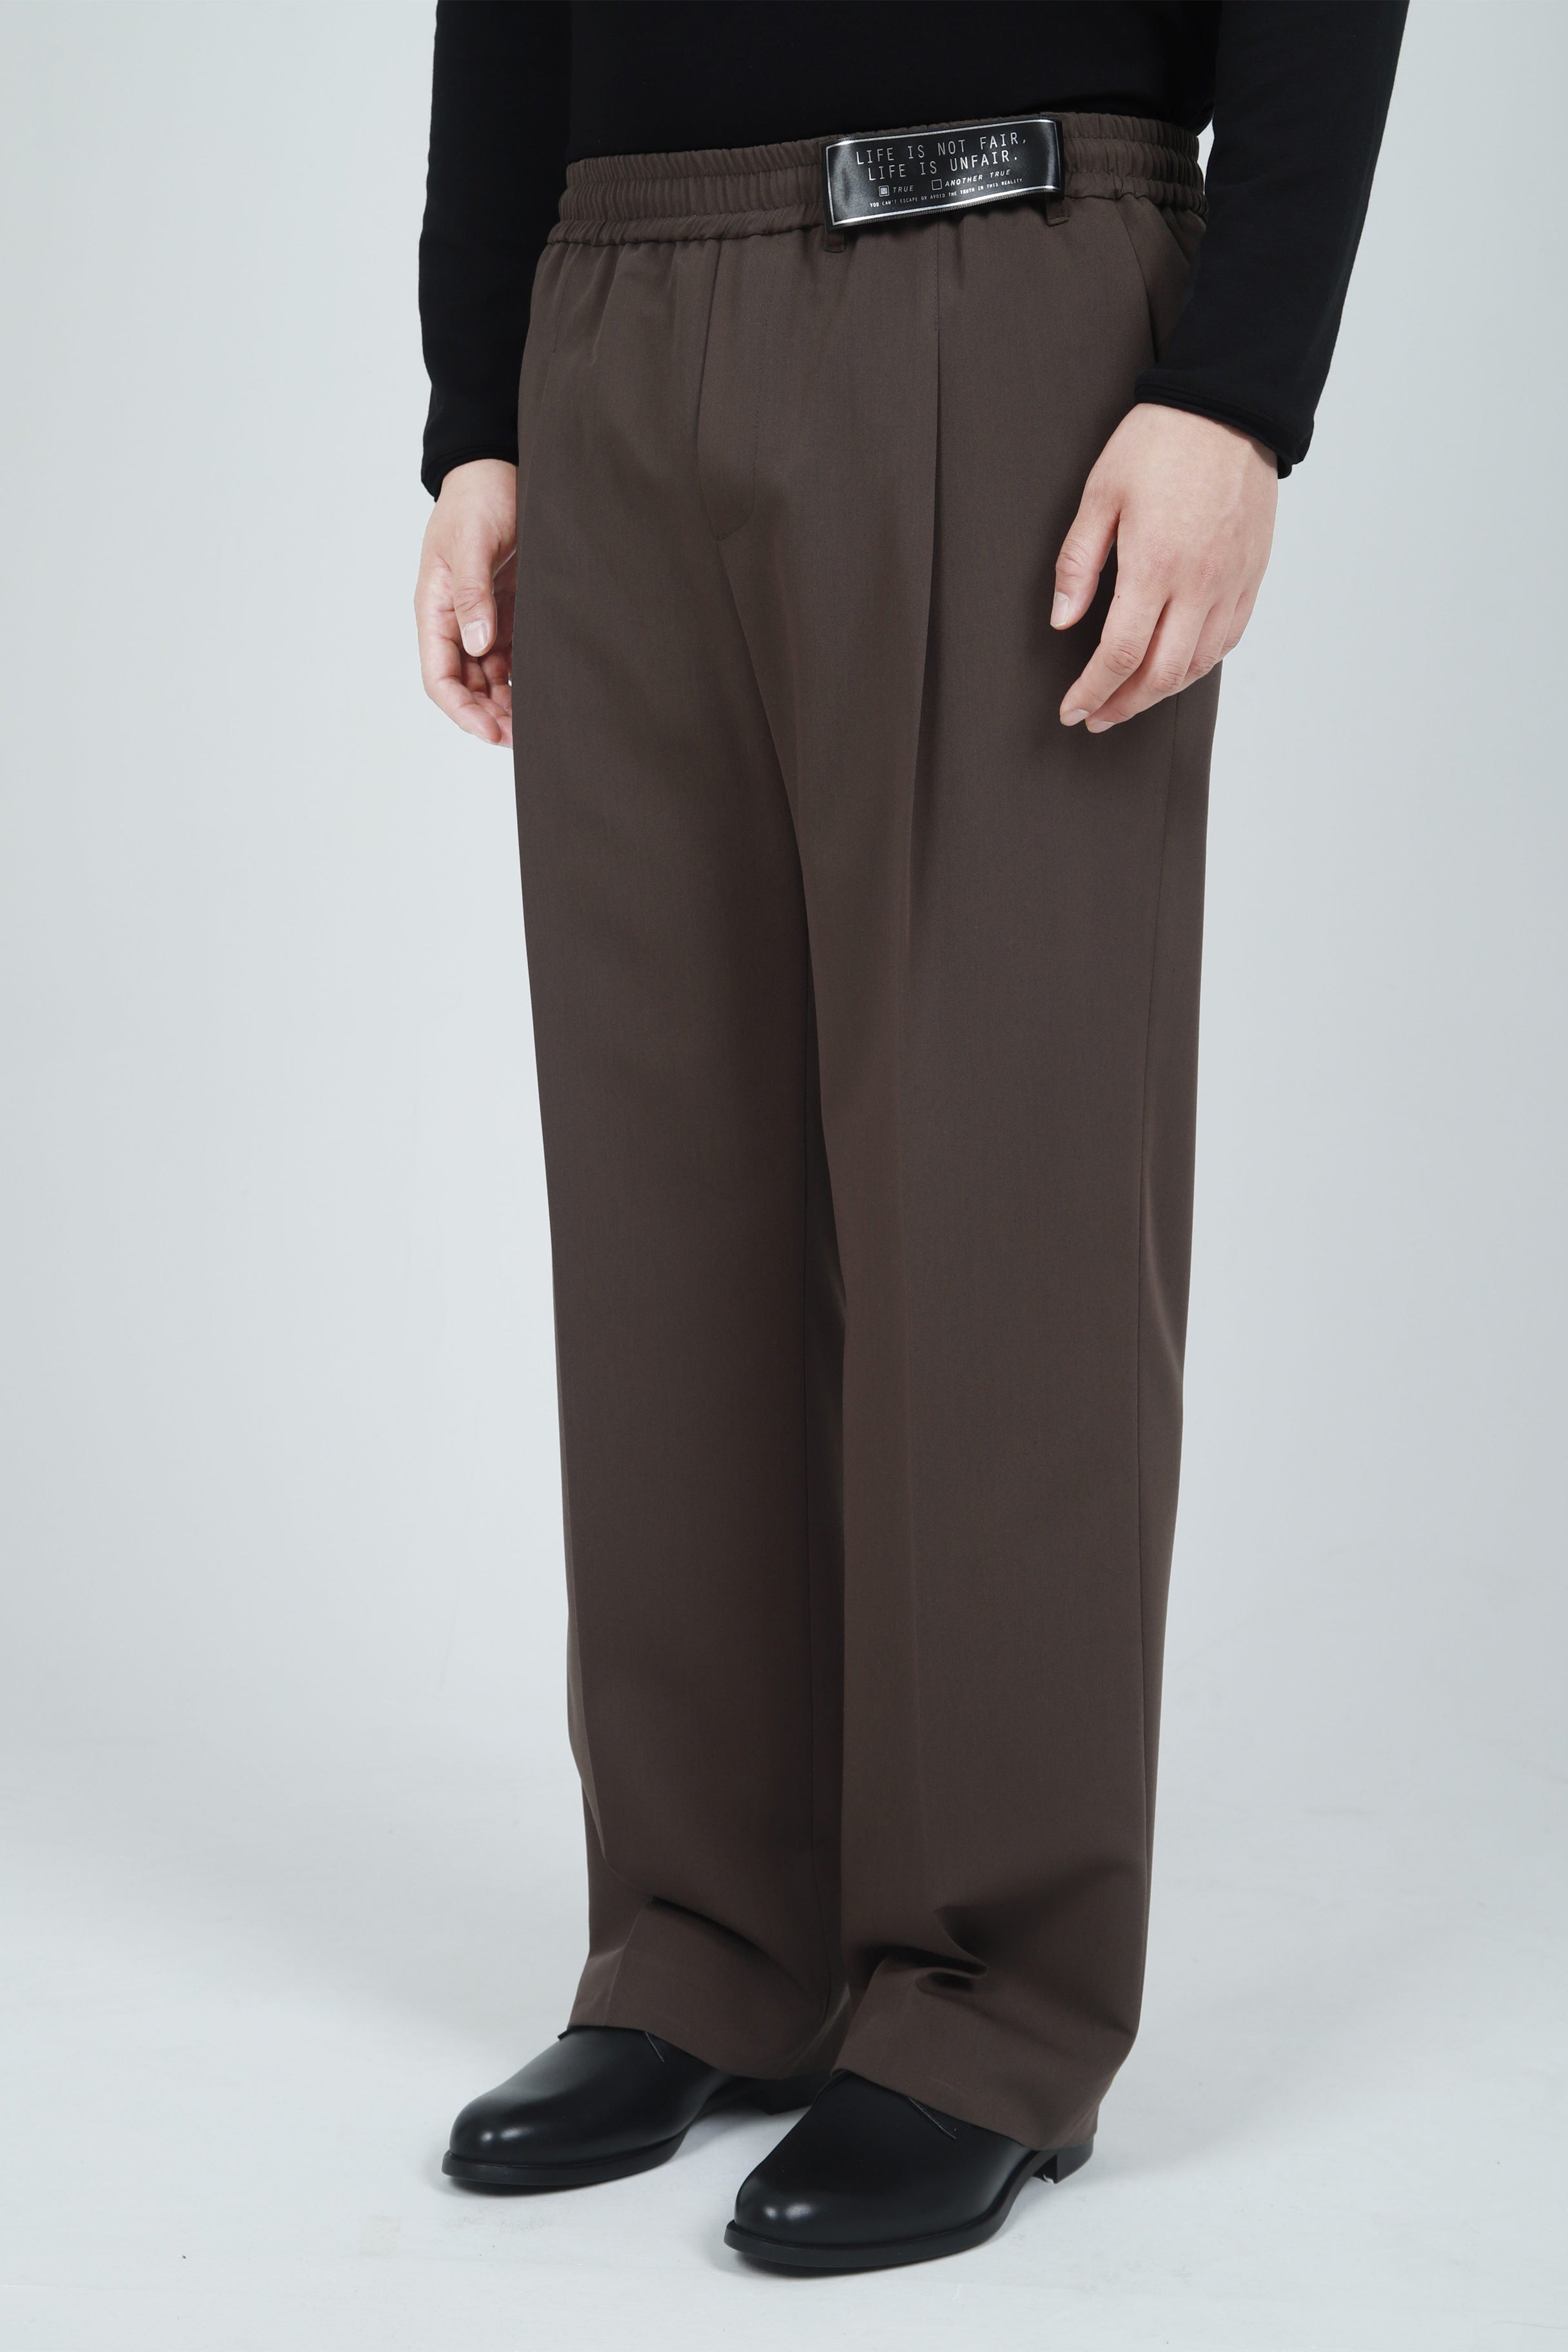 "LIFE IS NOT FAIR" LOOSE-FIT TROUSERS